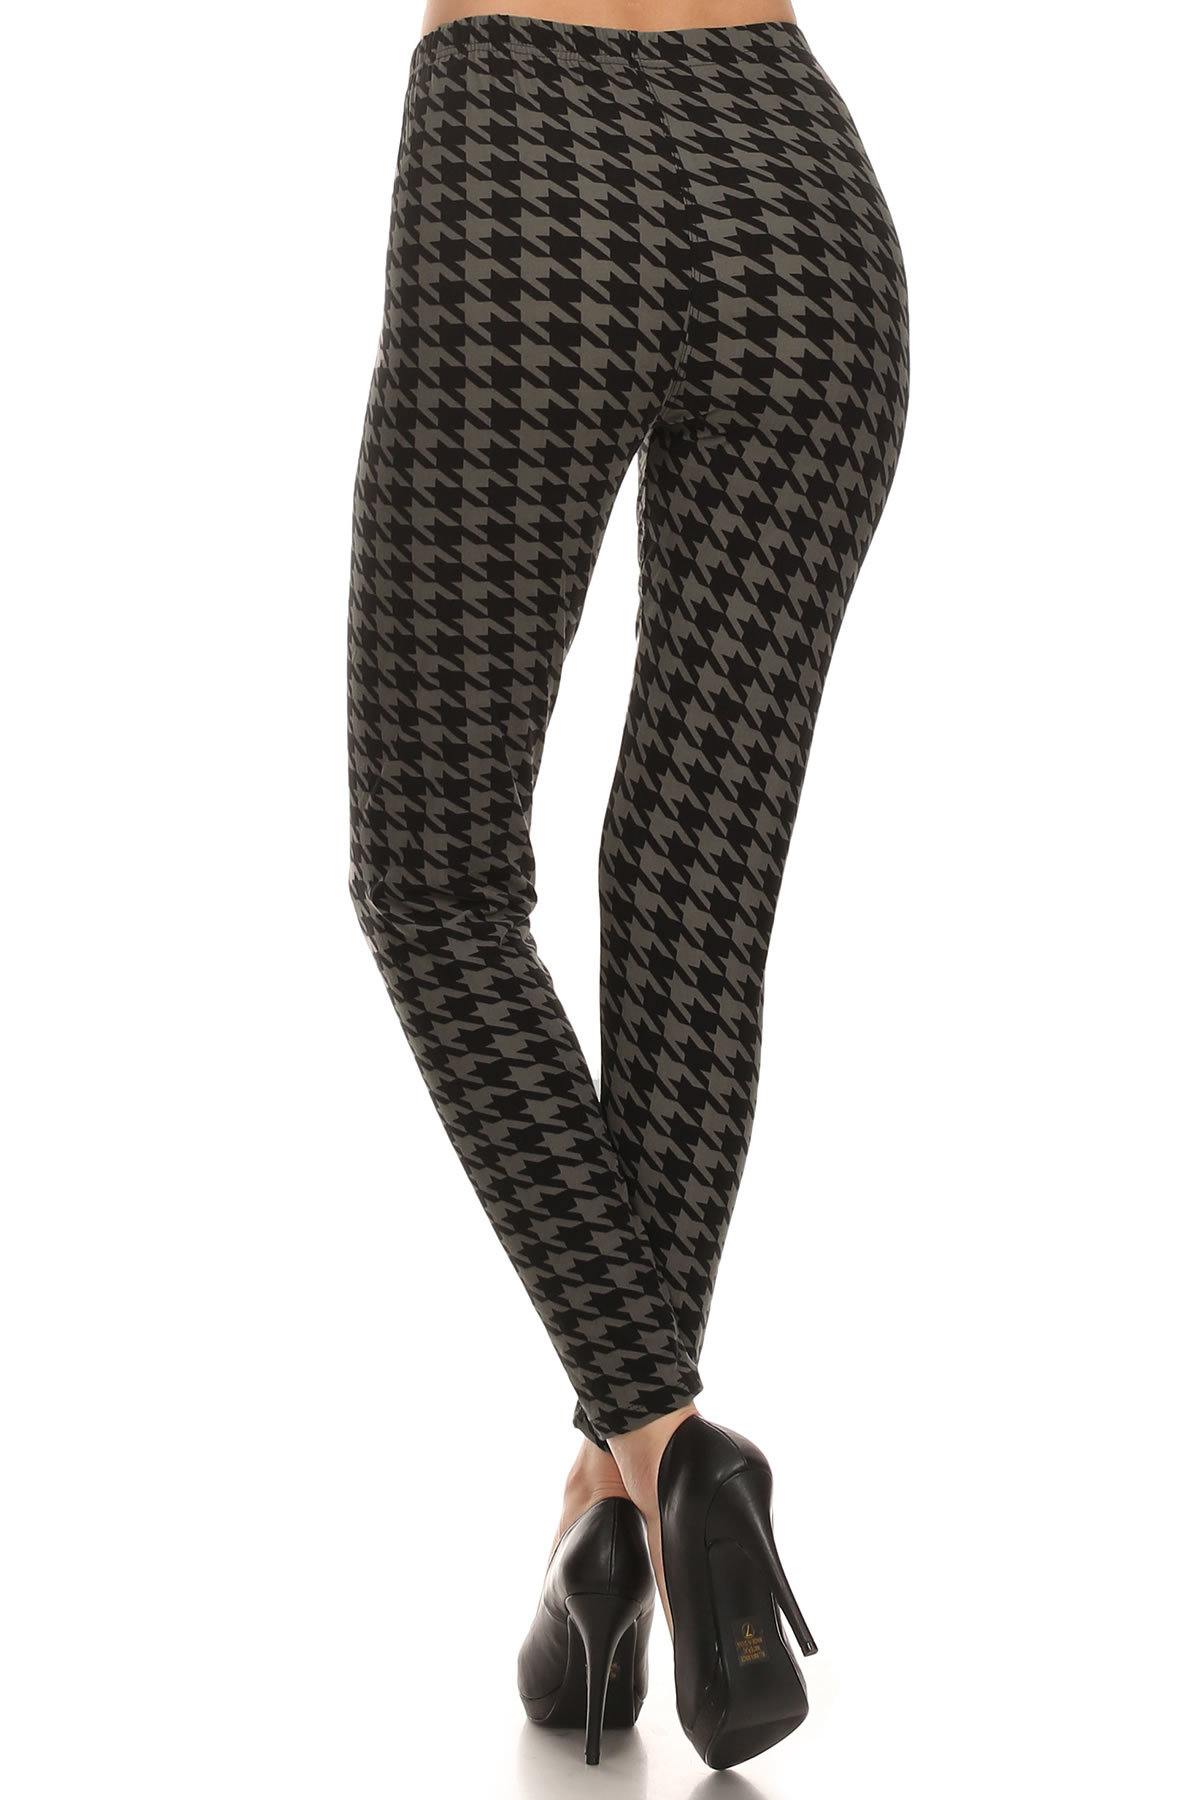 High Waisted Hound Tooth Printed Knit Legging With Elastic Waistband